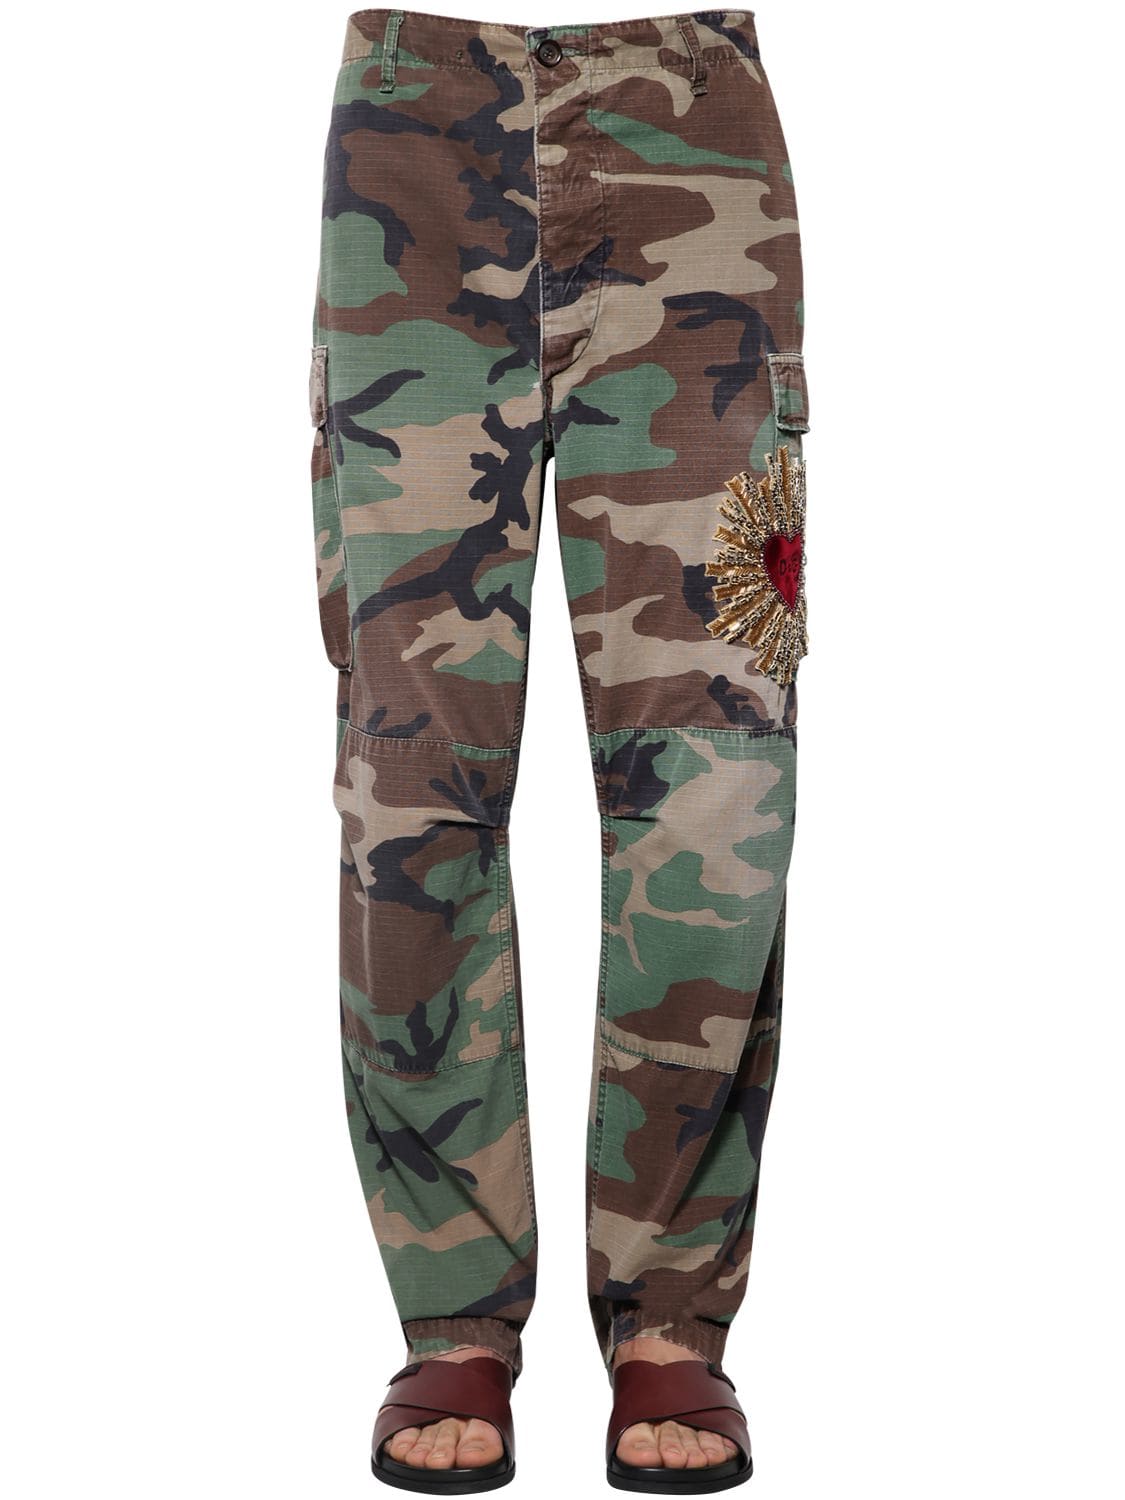 Heart Embroidered Camouflage Pants | The Fashionisto